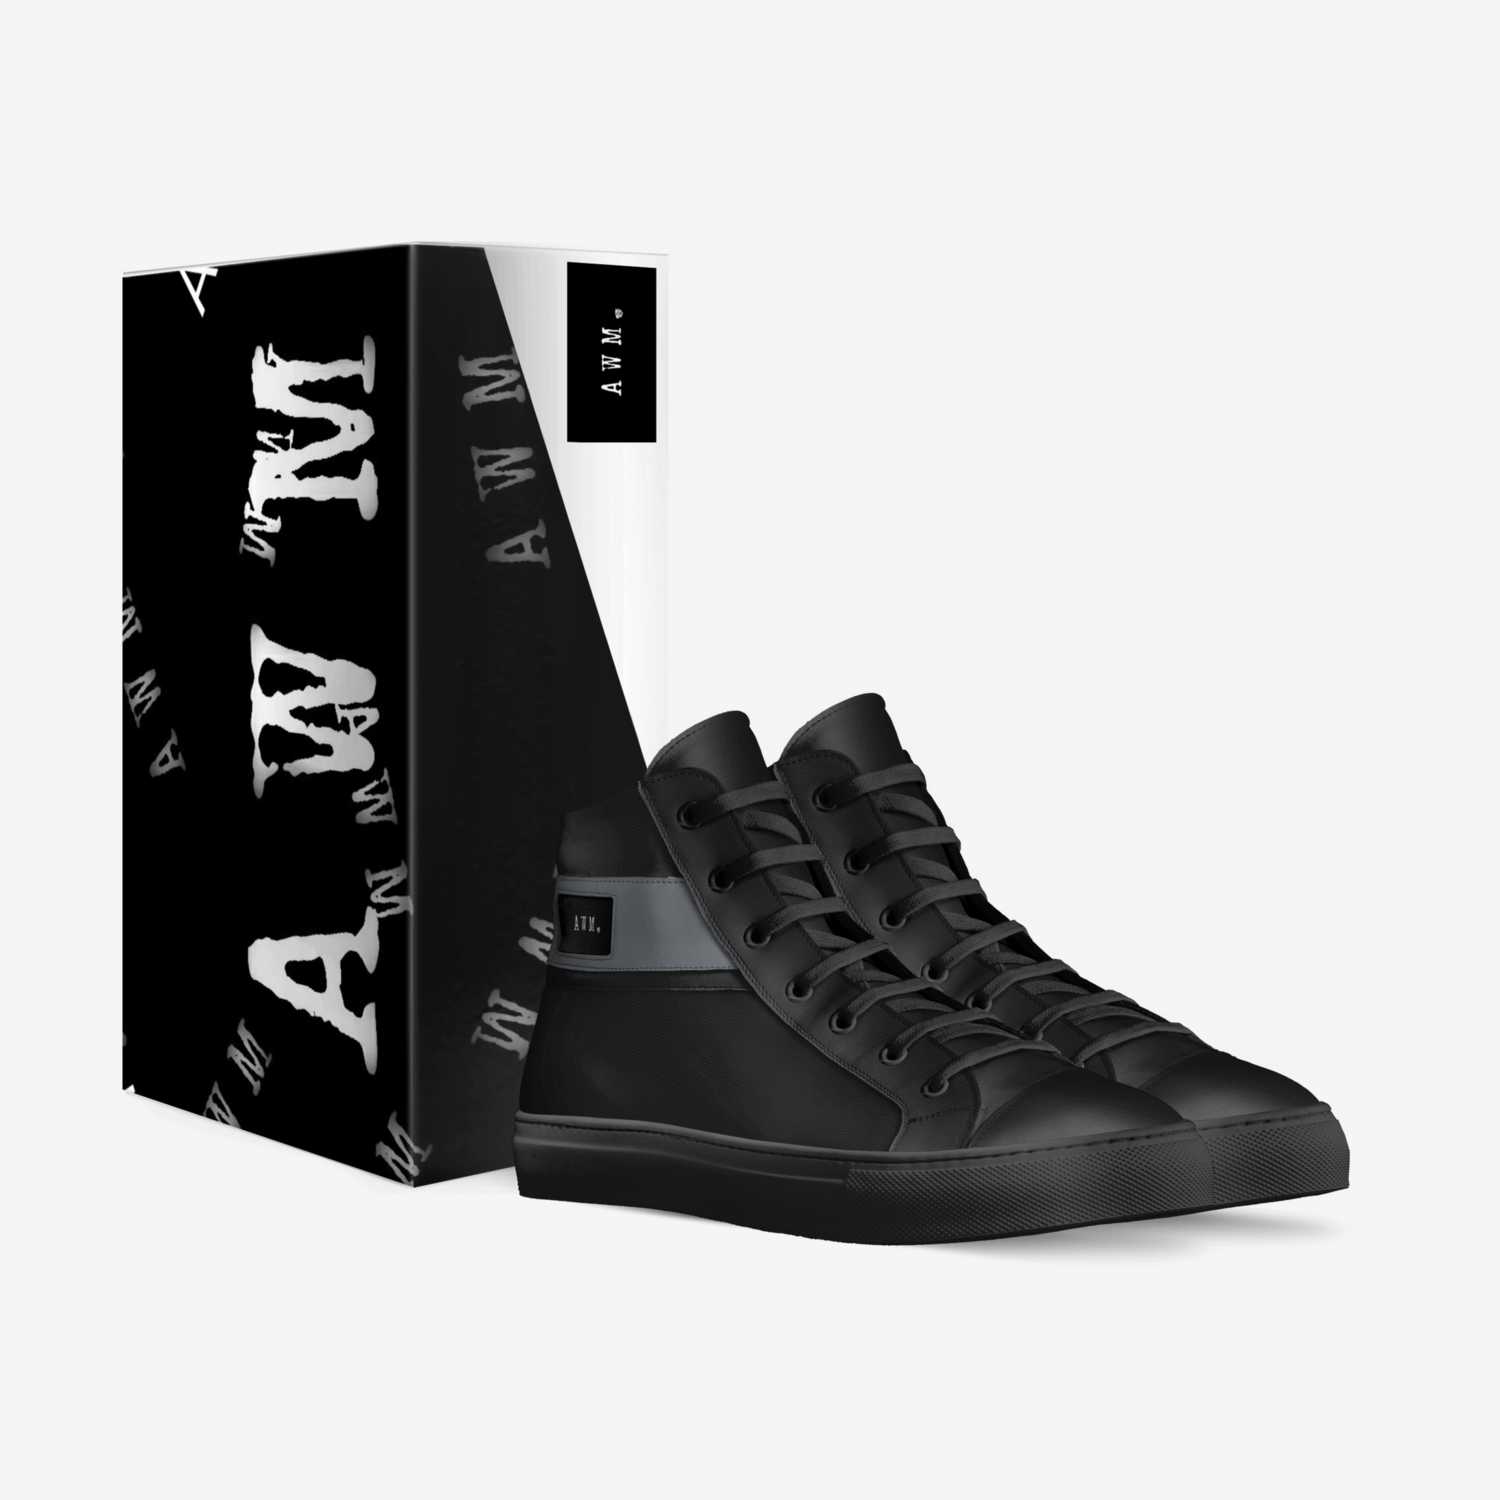 Awm custom made in Italy shoes by African War Mask | Box view